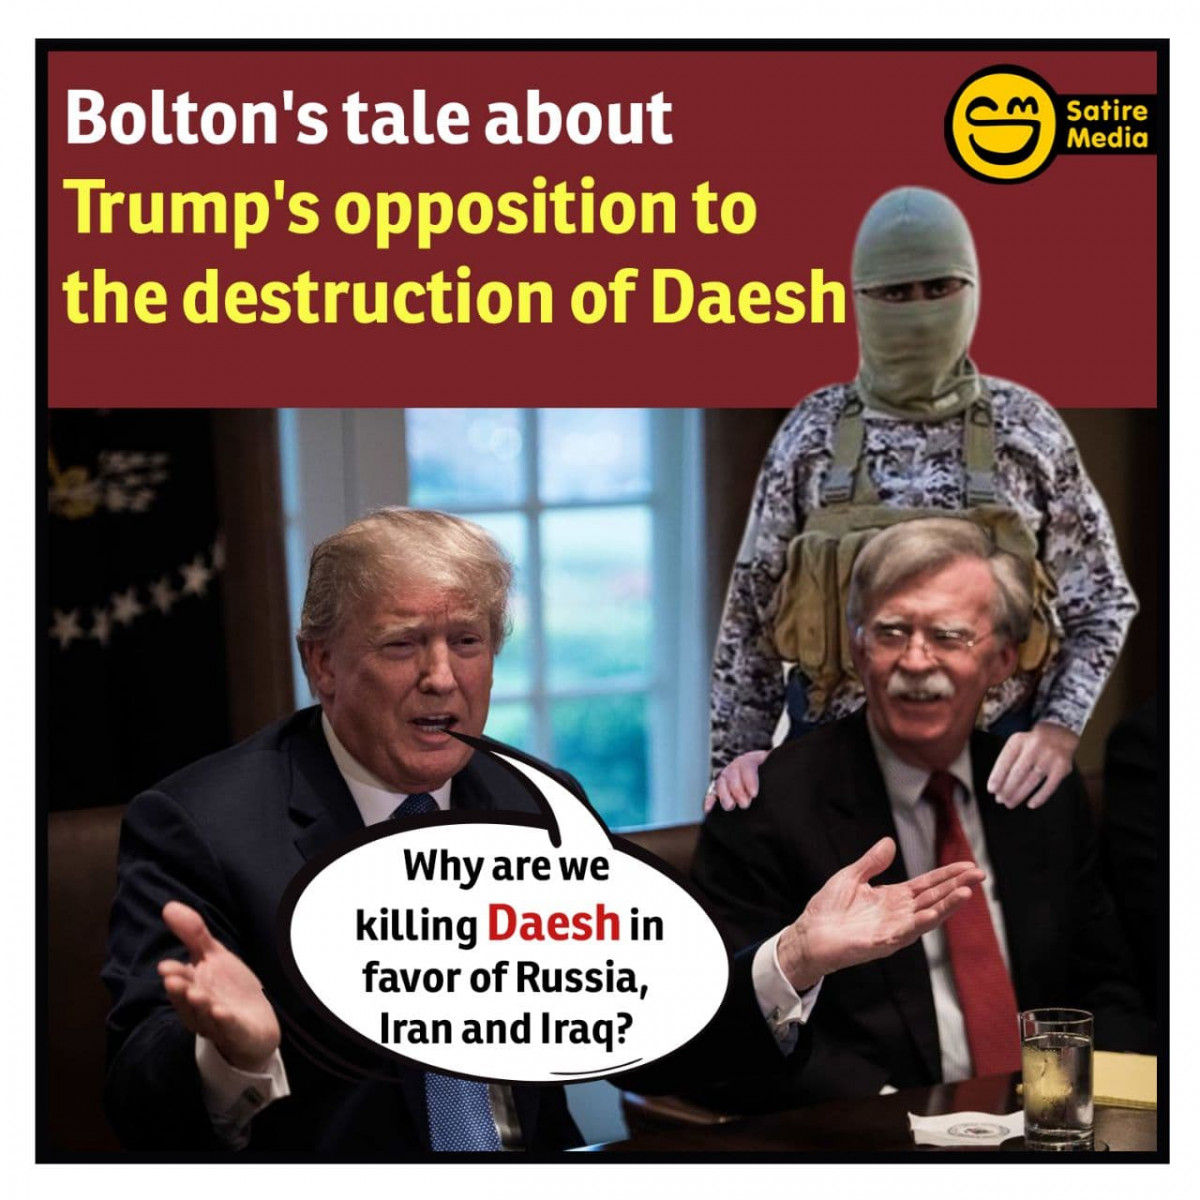 Bolton's tale about Trump's opposition to the destruction of Daesh